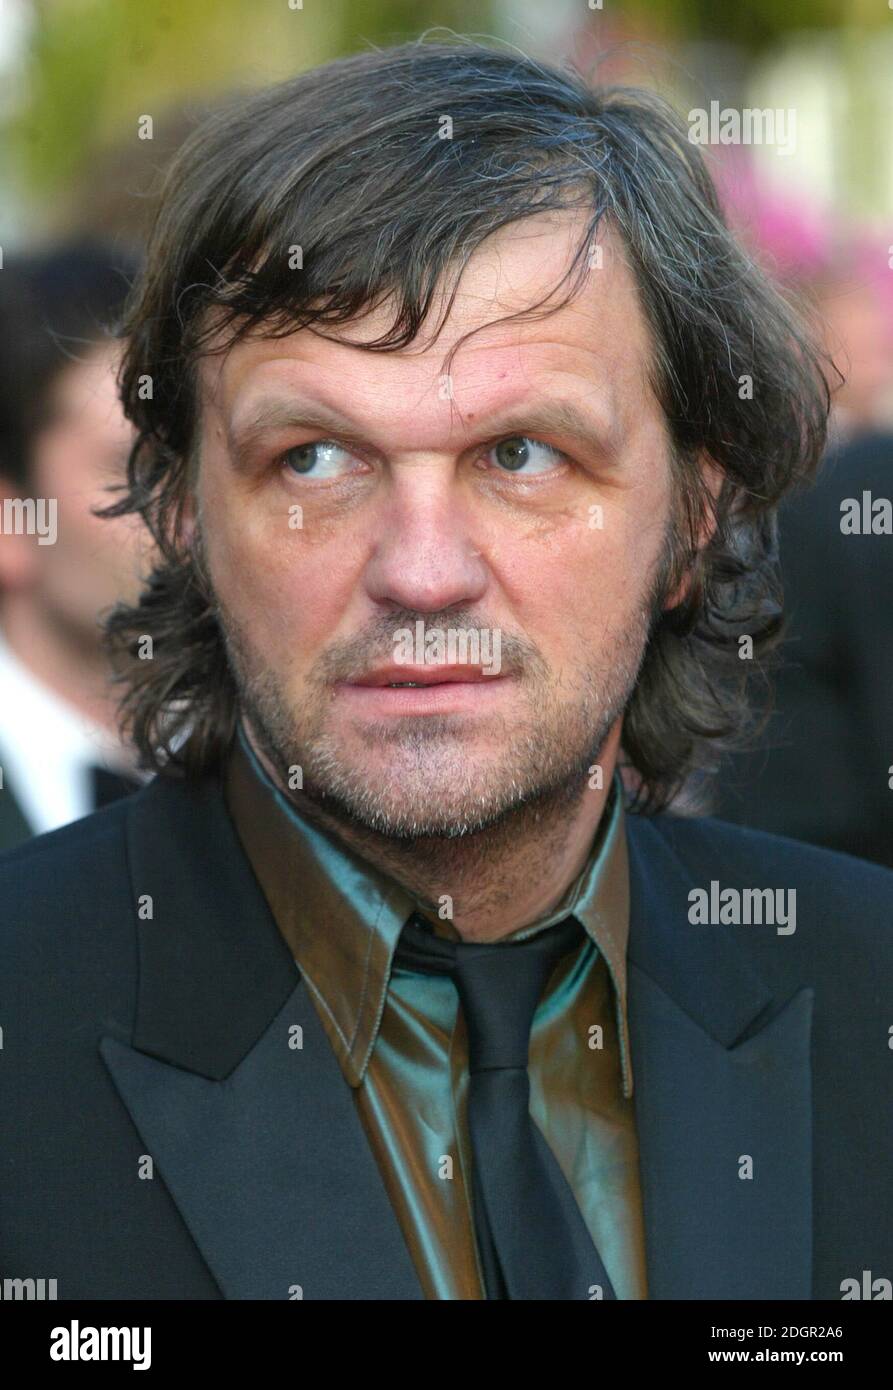 Dury Chairman Emir Kusturica at the premiere for Chromophobia, also the Closing Ceremony of the 58th Festival De Cannes, the Palais Du Festival. Doug Peters/allactiondigital.com  Stock Photo